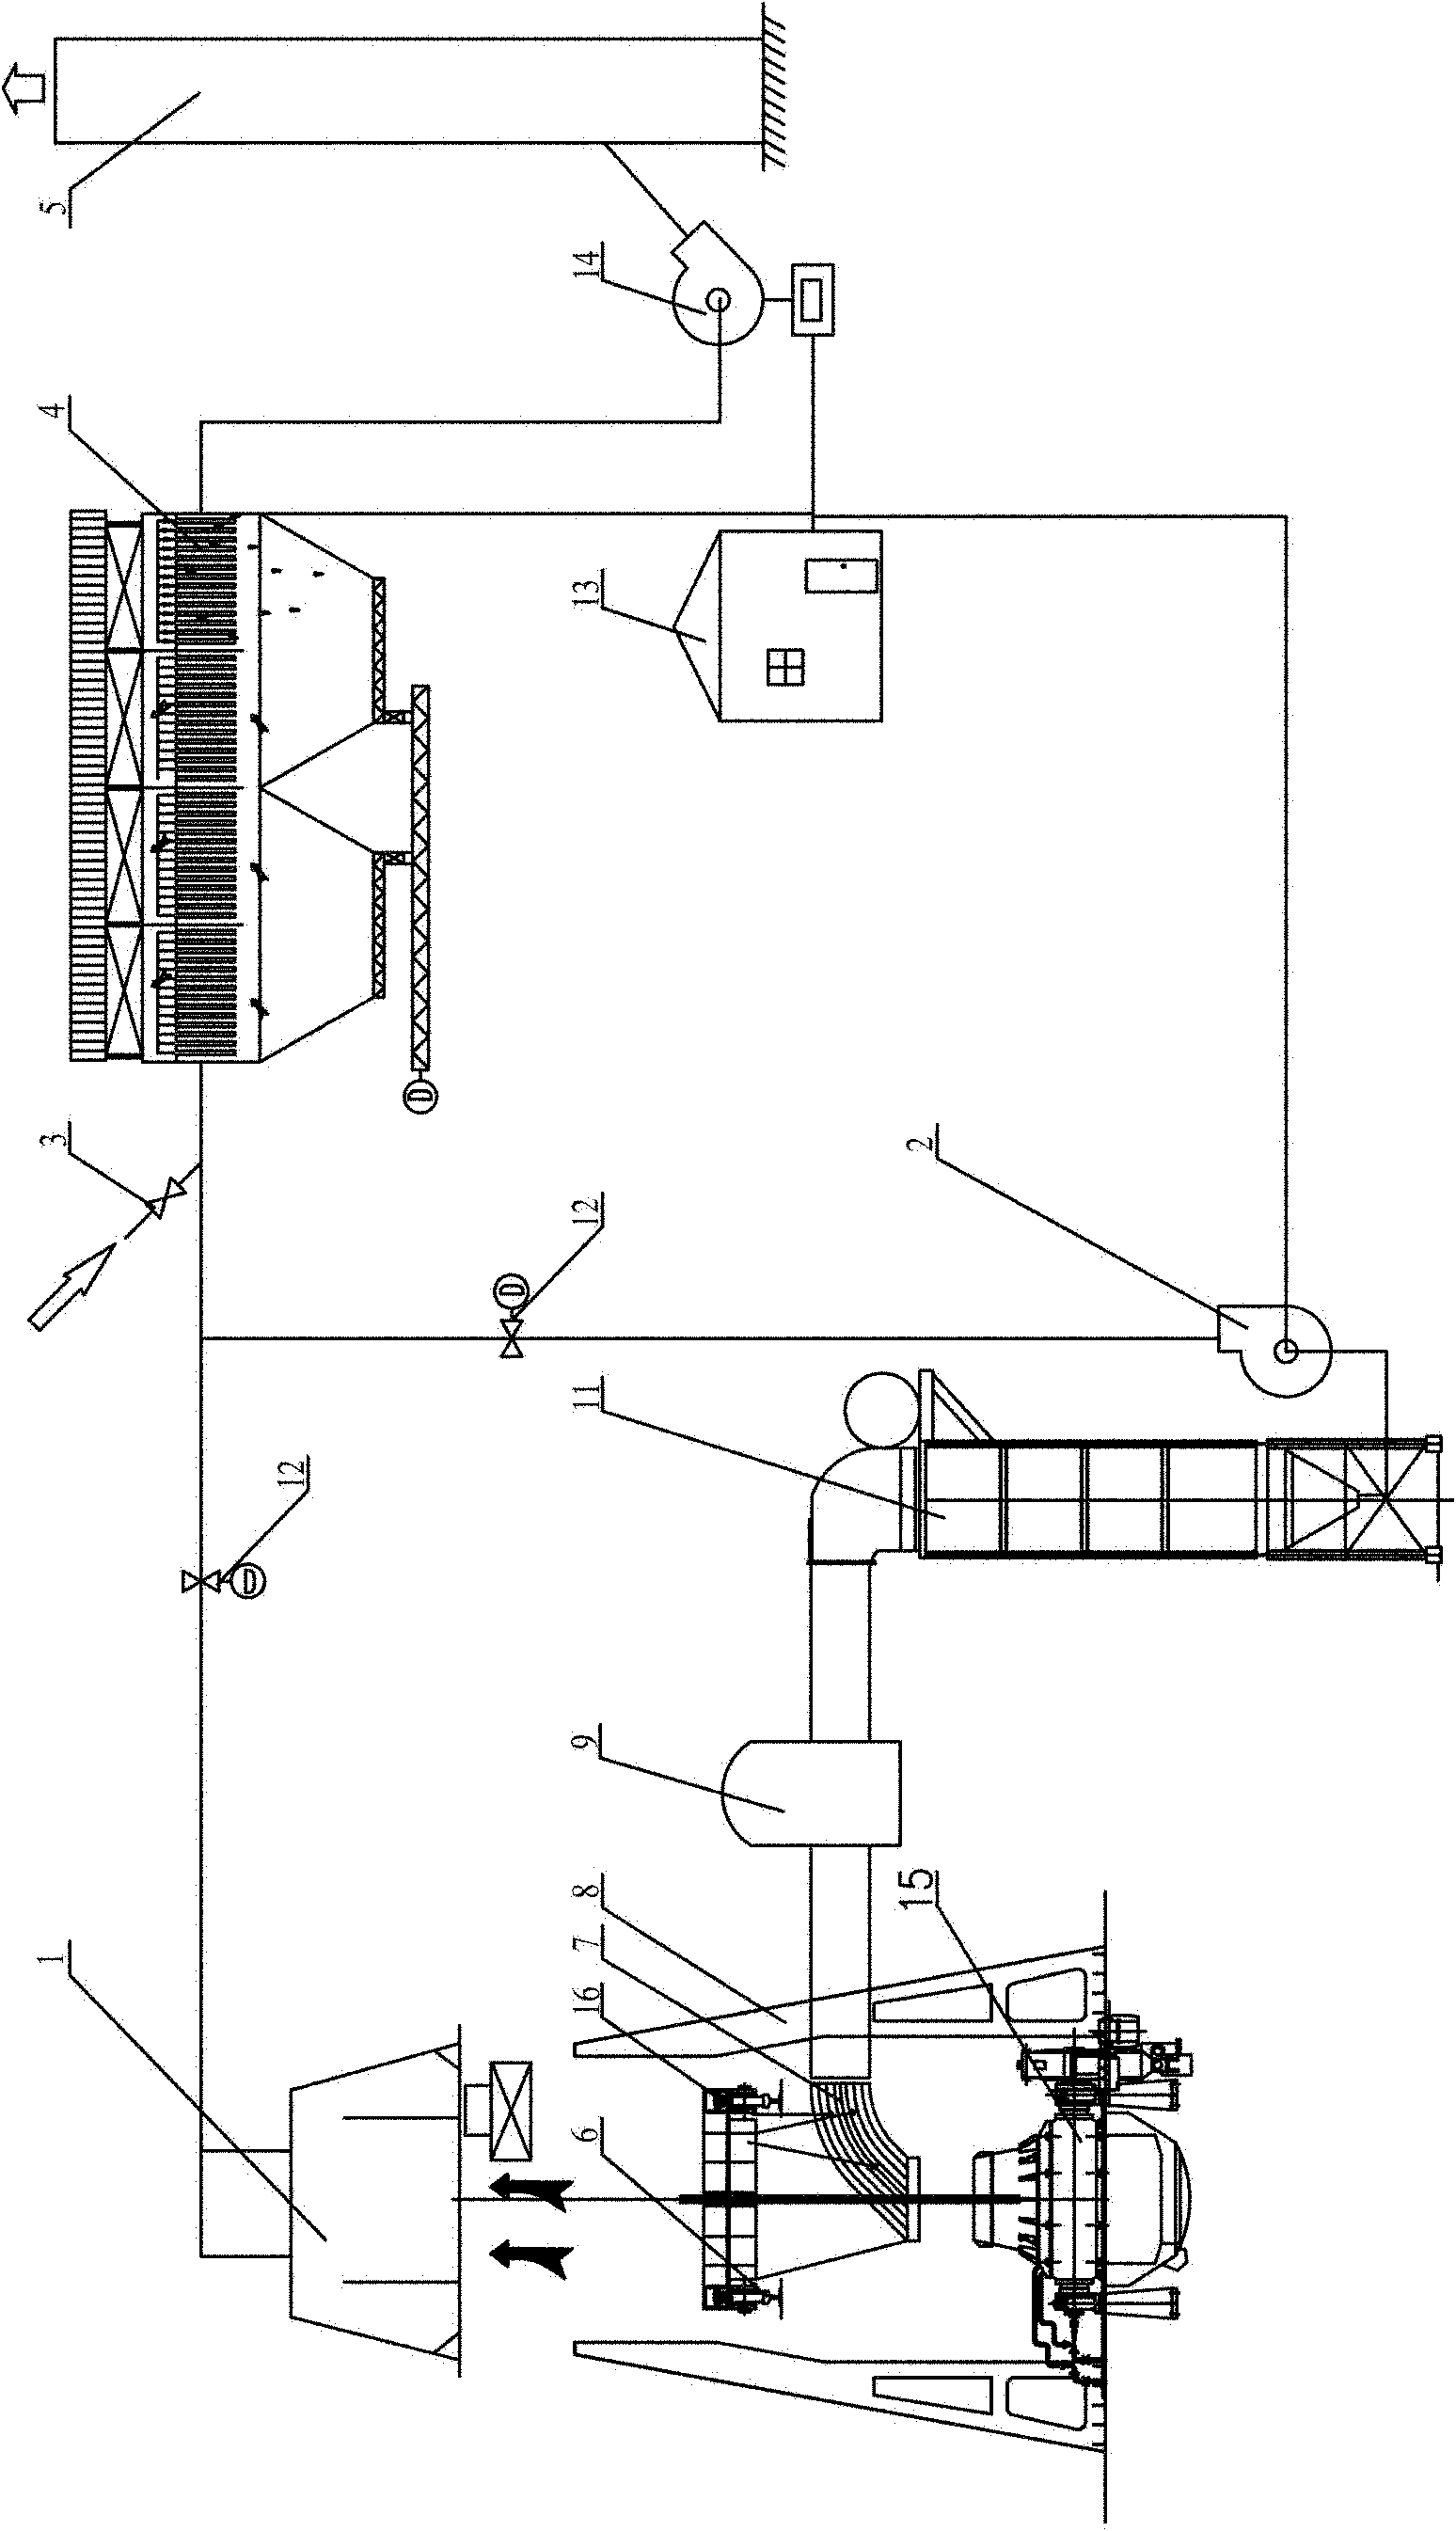 Dust collecting and waste heat utilizing system for argon oxygen decarburization furnace